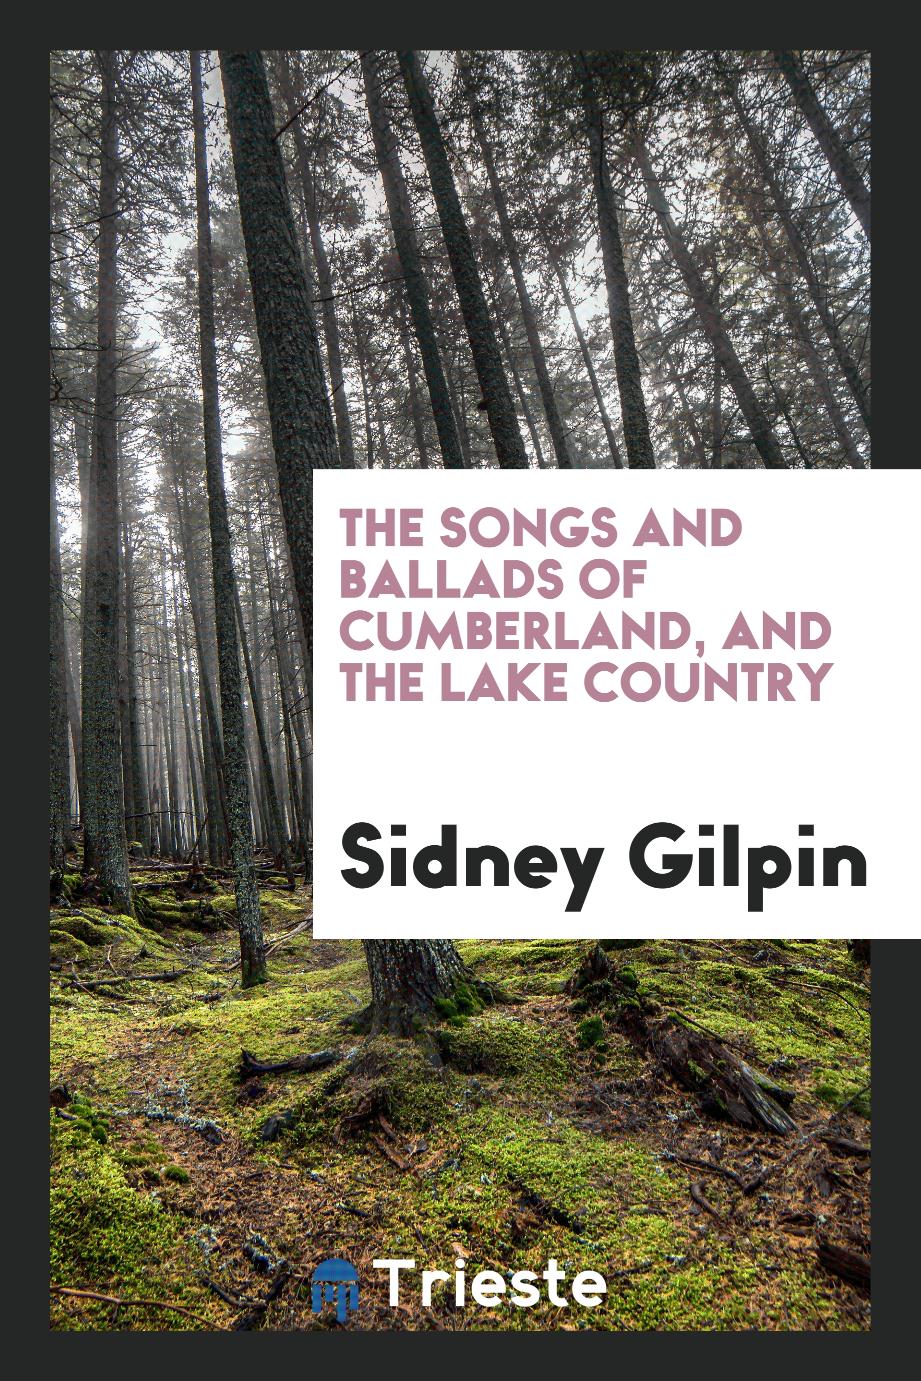 The Songs and Ballads of Cumberland, and the Lake Country